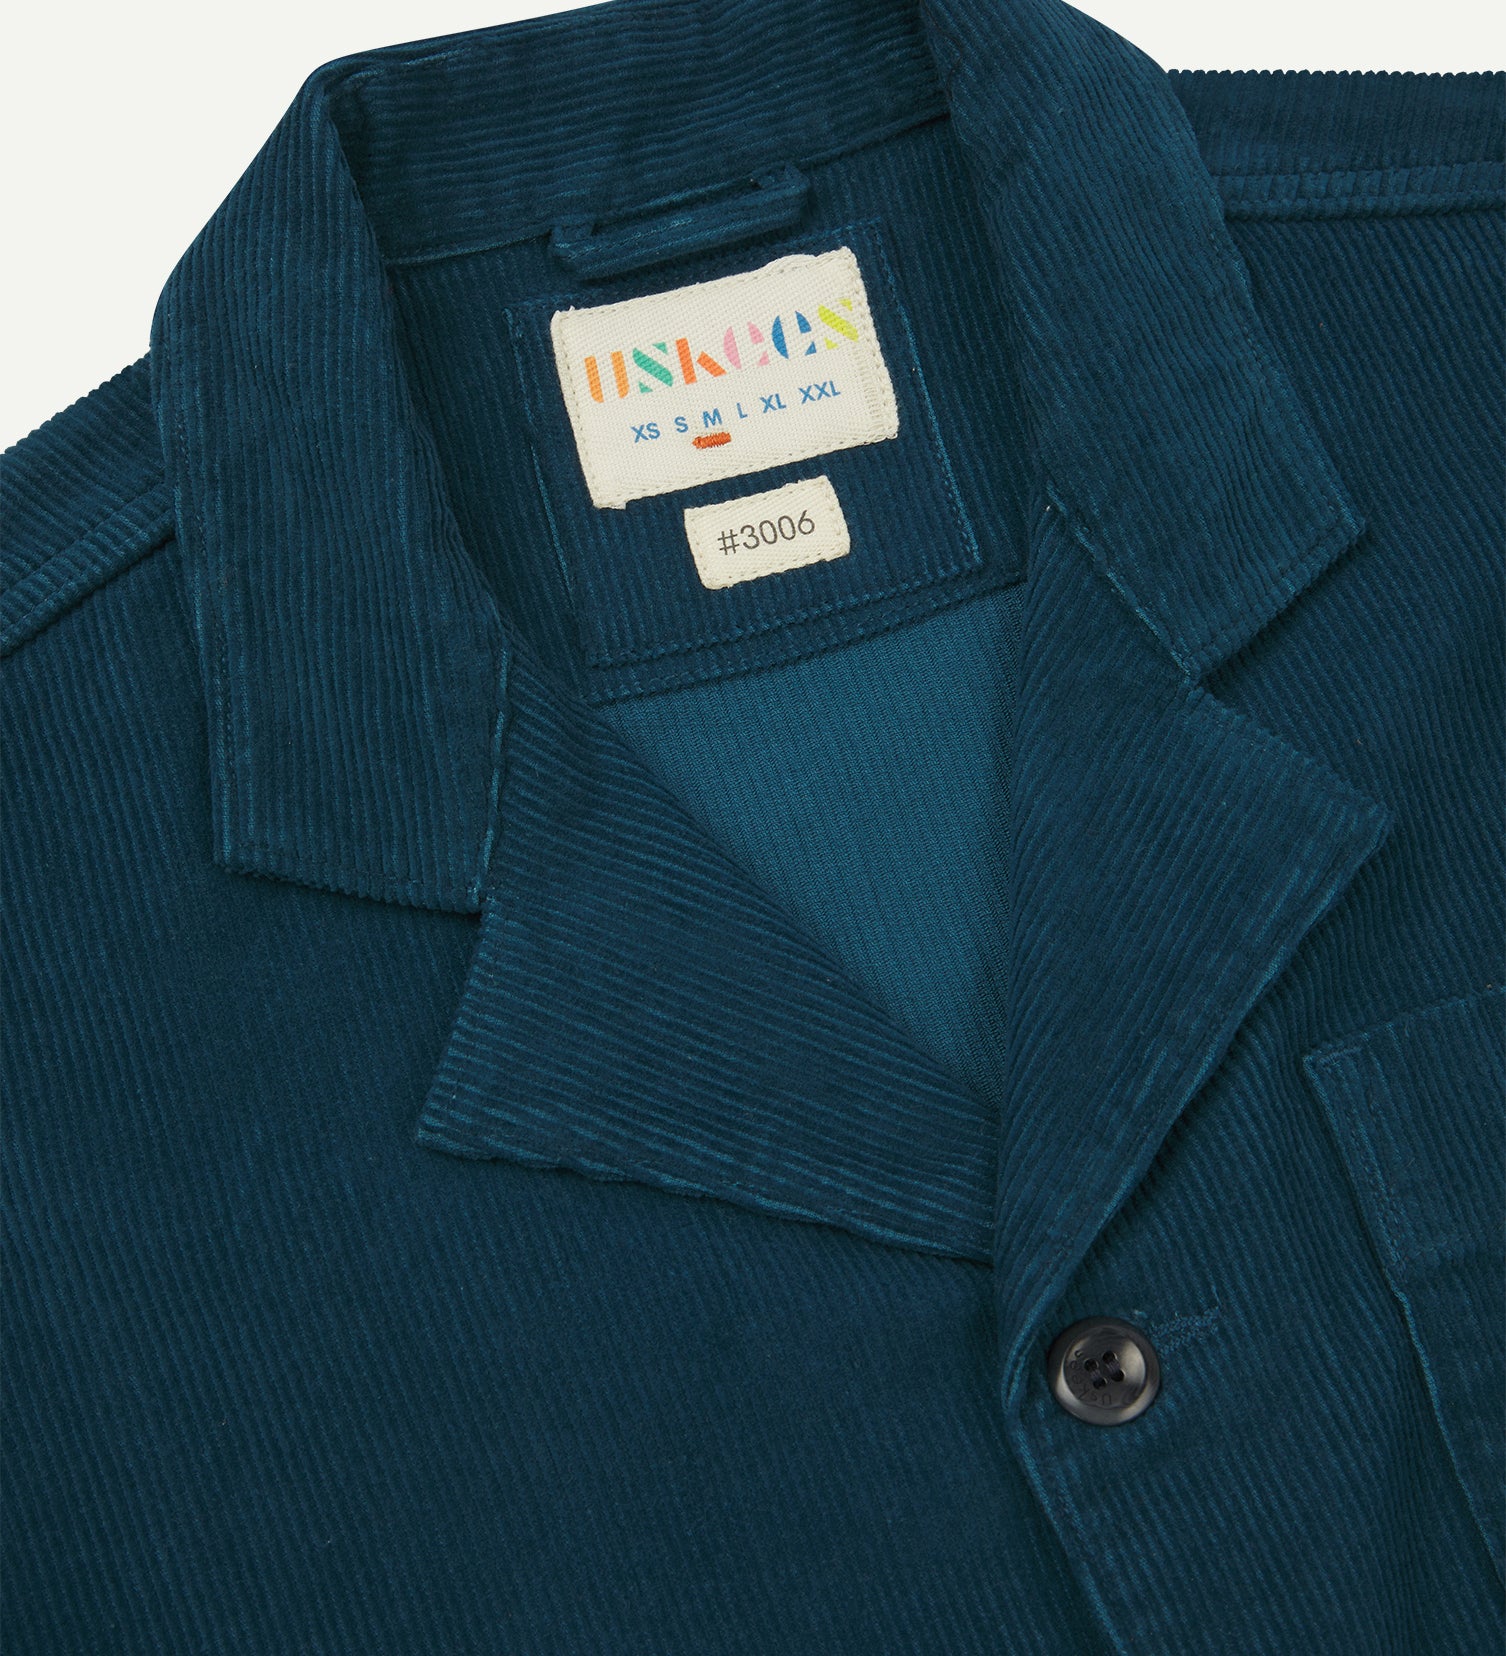 Close-up front view of men's corduroy petrol blue blazer from Uskees showing the collar, lapels and brand label.